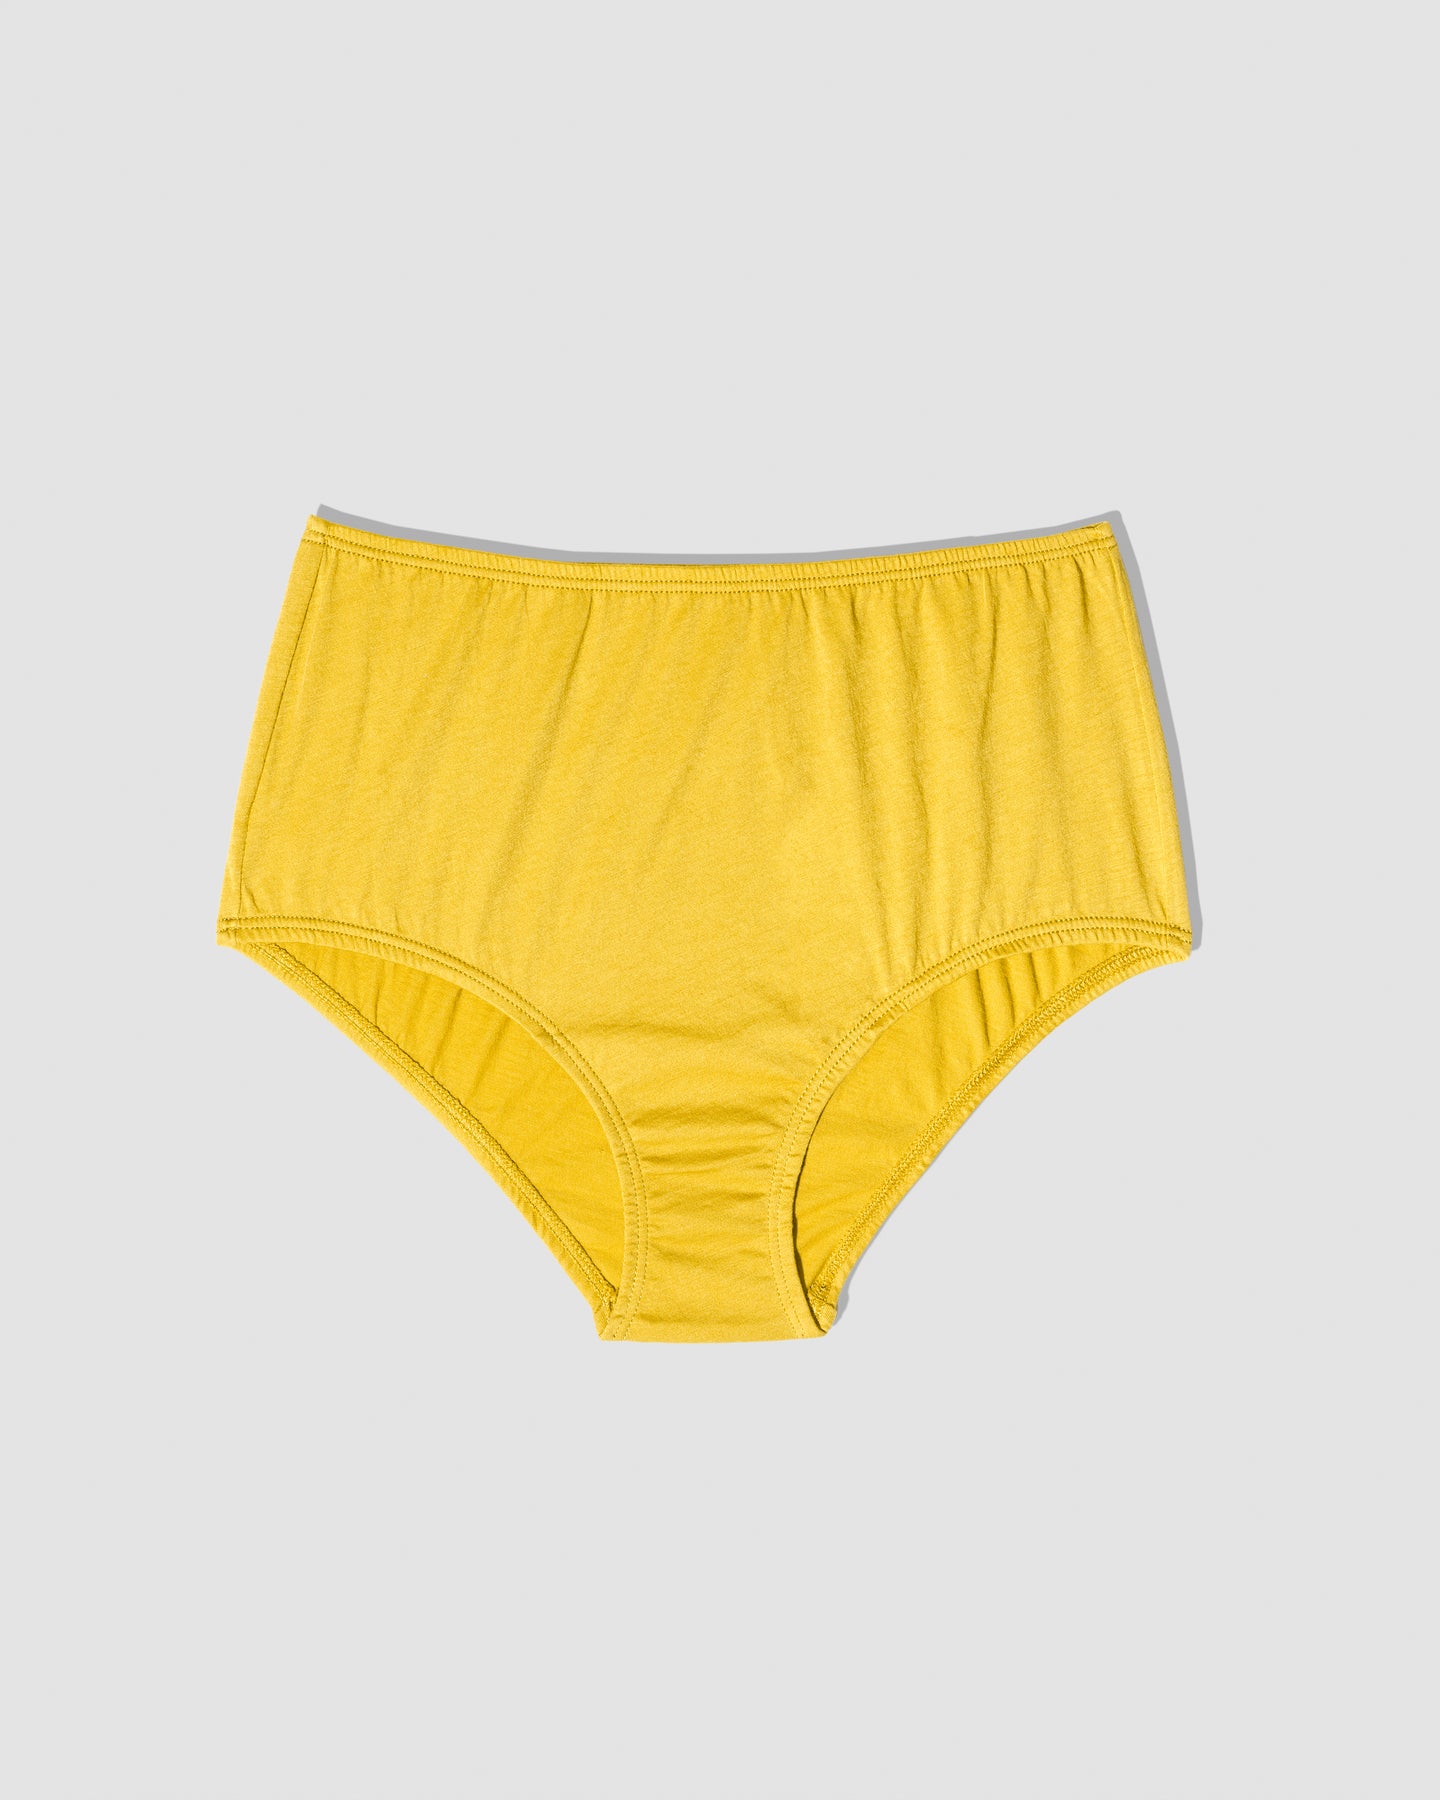 Buy Mid Waist Giraffe Print Hipster Panty in Golden Yellow with Inner  Elastic - 100% Cotton Online India, Best Prices, COD - Clovia - PN2855S02